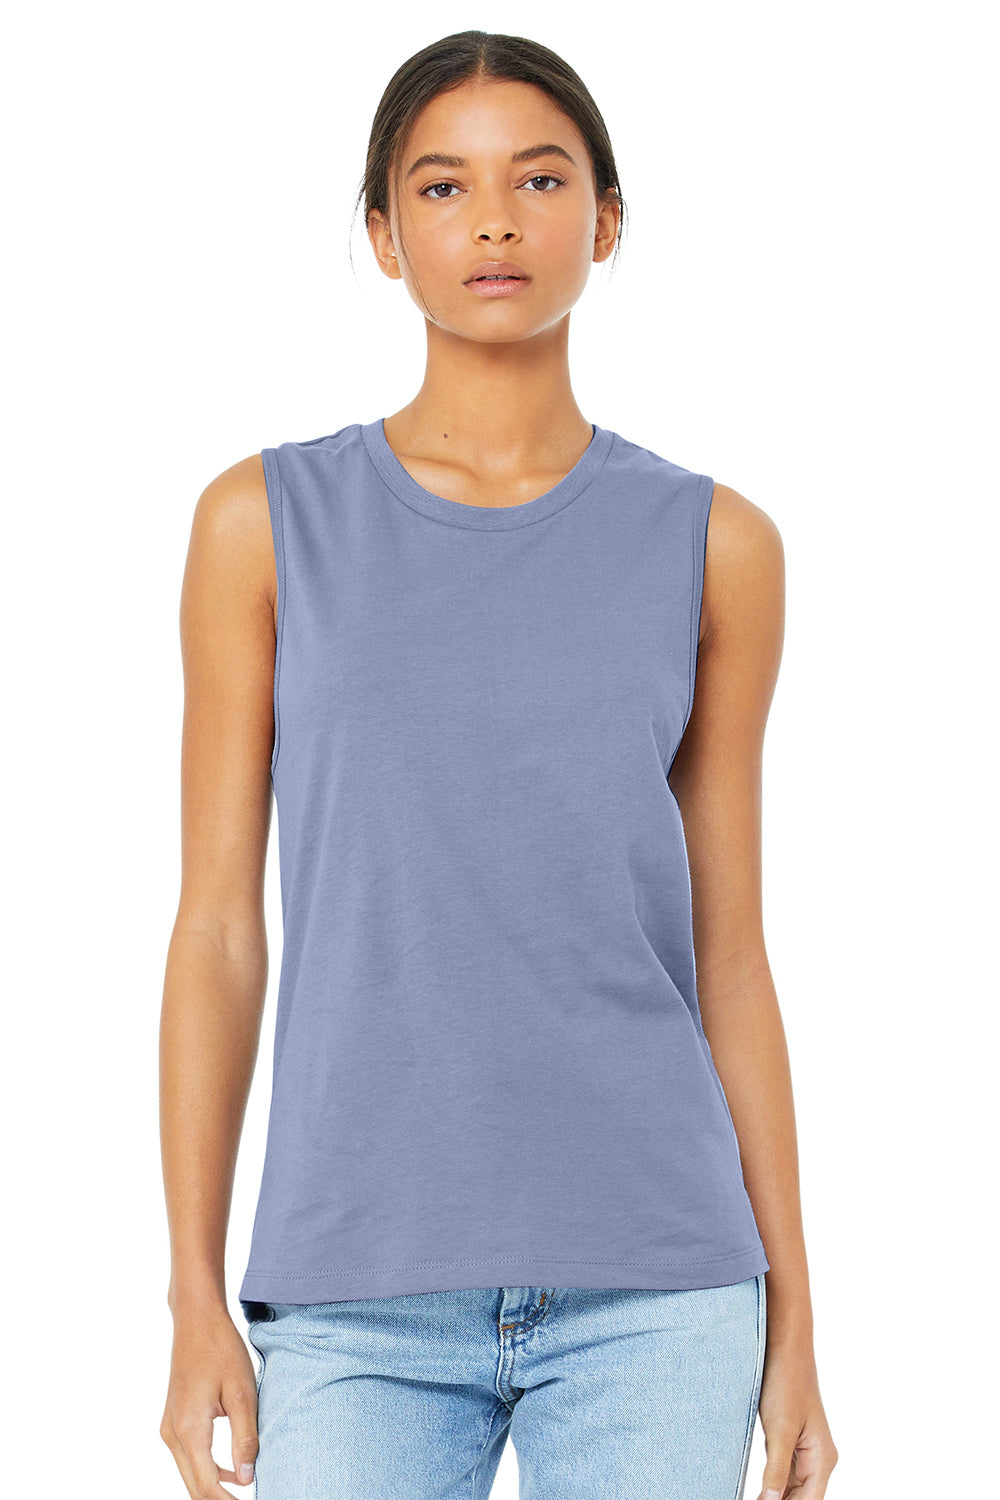 Bella + Canvas BC6003/B6003/6003 Womens Jersey Muscle Tank Top Lavender Blue Model Front